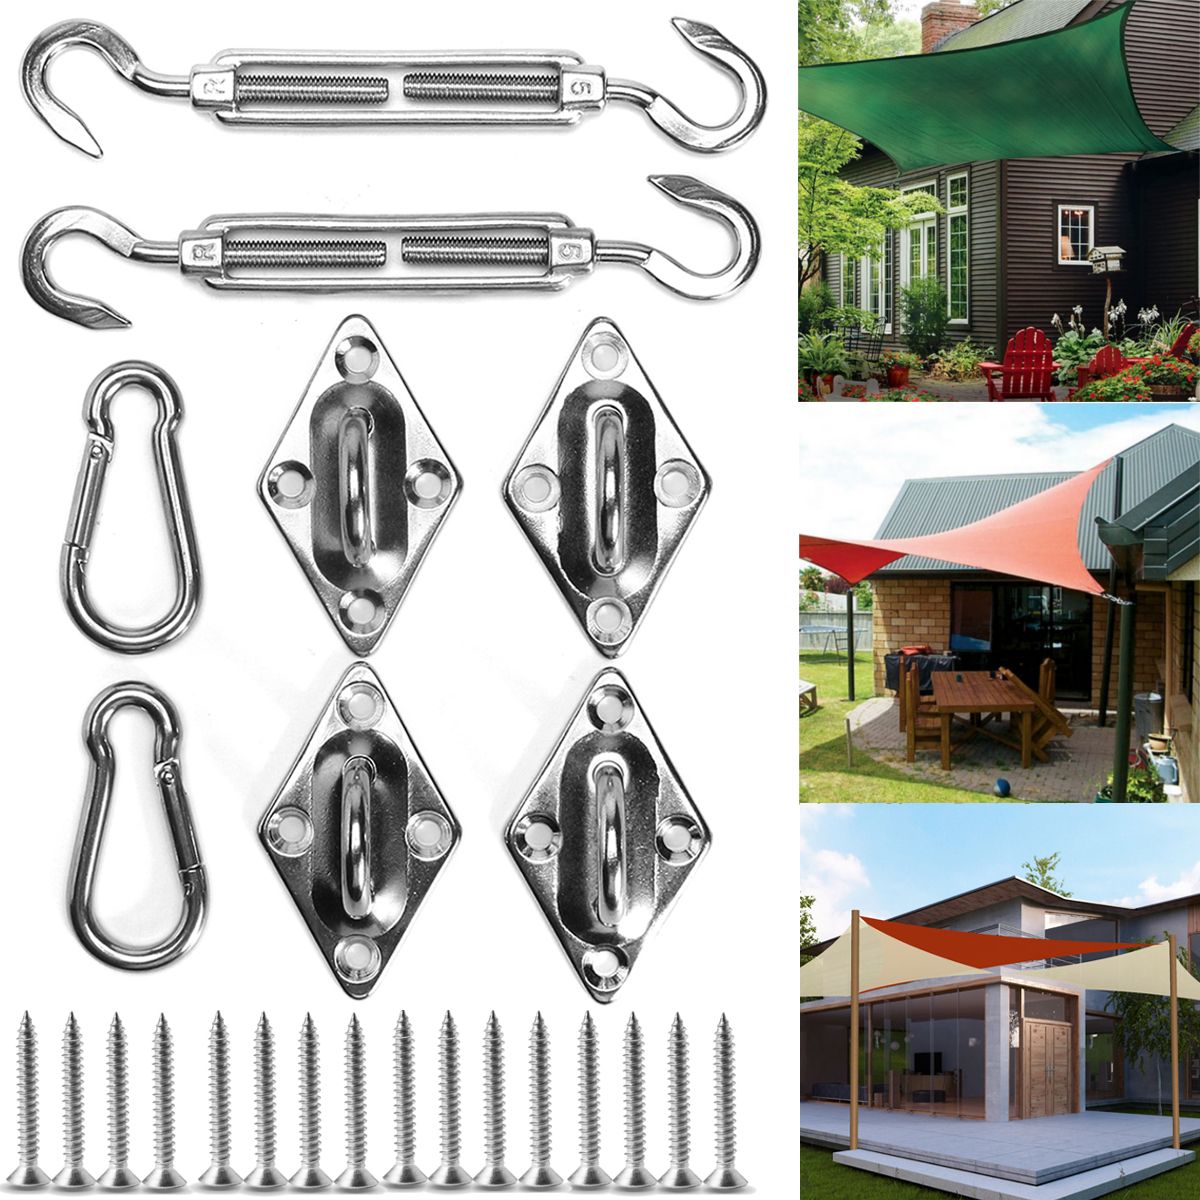 8Pcs-Stainless-Steel-Outdoor-Sun-Sail-Shade-Canopy-DIY-Fixing-Fittings-Hardware-Accessory-Tools-Kit-1318407